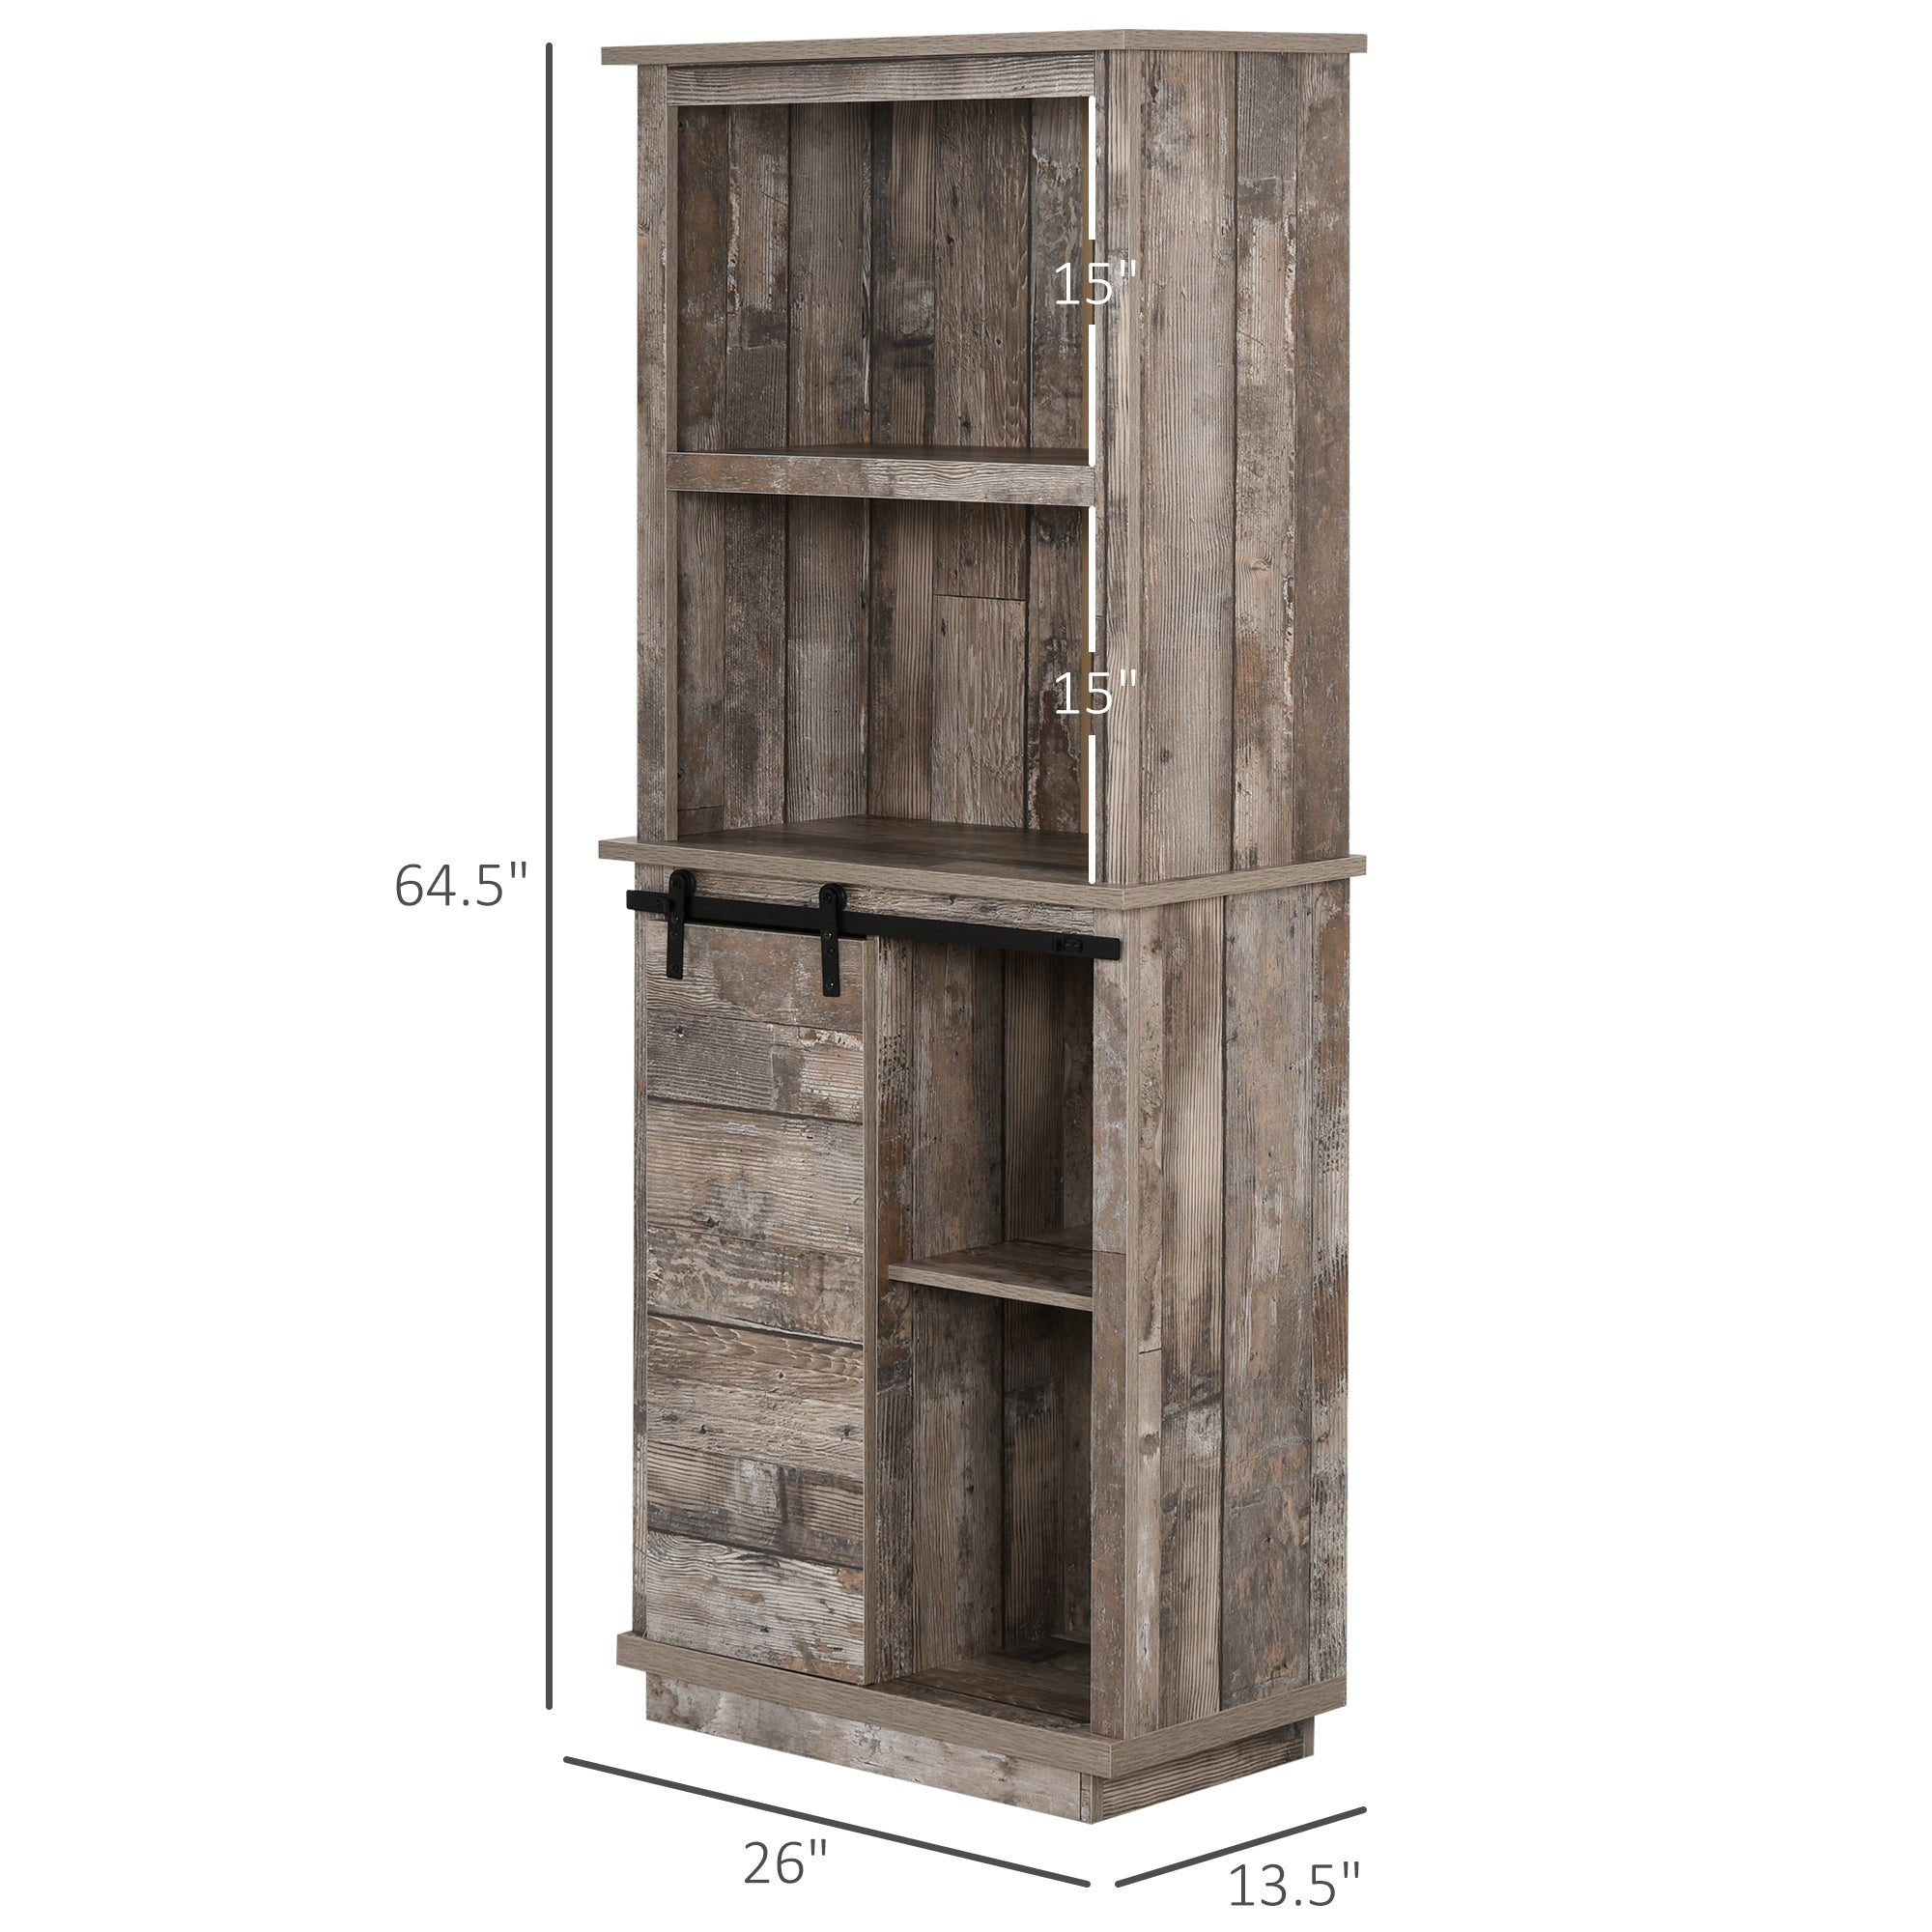 Freestanding Rustic Kitchen Buffet with Hutch, Pantry Storage Cabinet with Sliding Barn Door, Adjustable Shelf - Vintage Wood